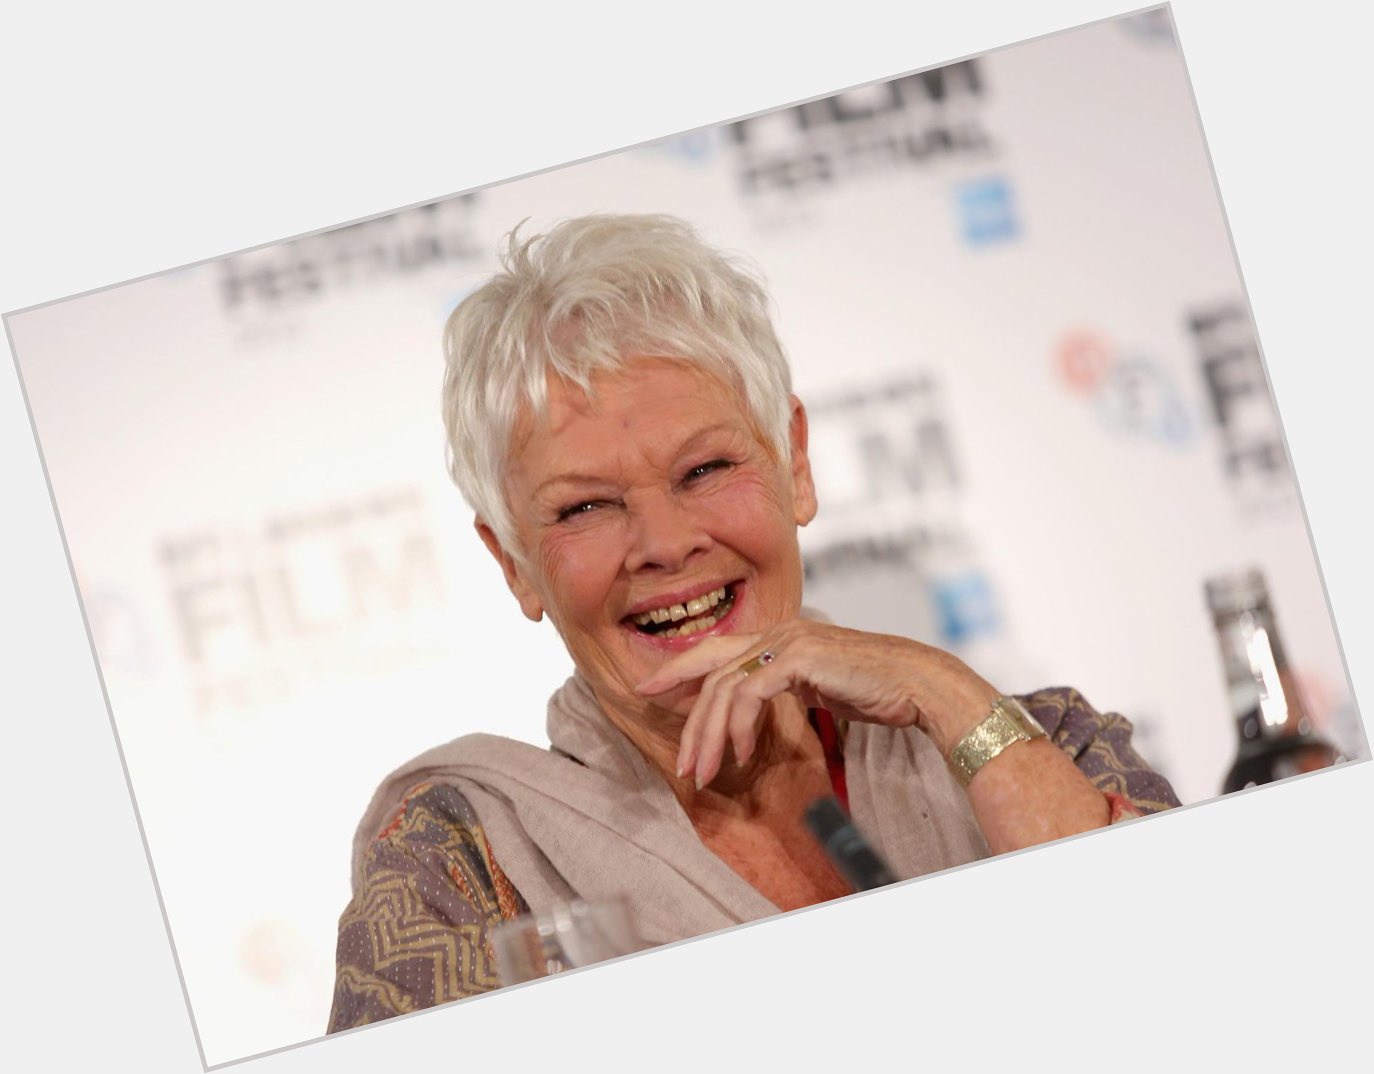 Happy birthday to Dame Judi Dench, who turns 80 years old today!  